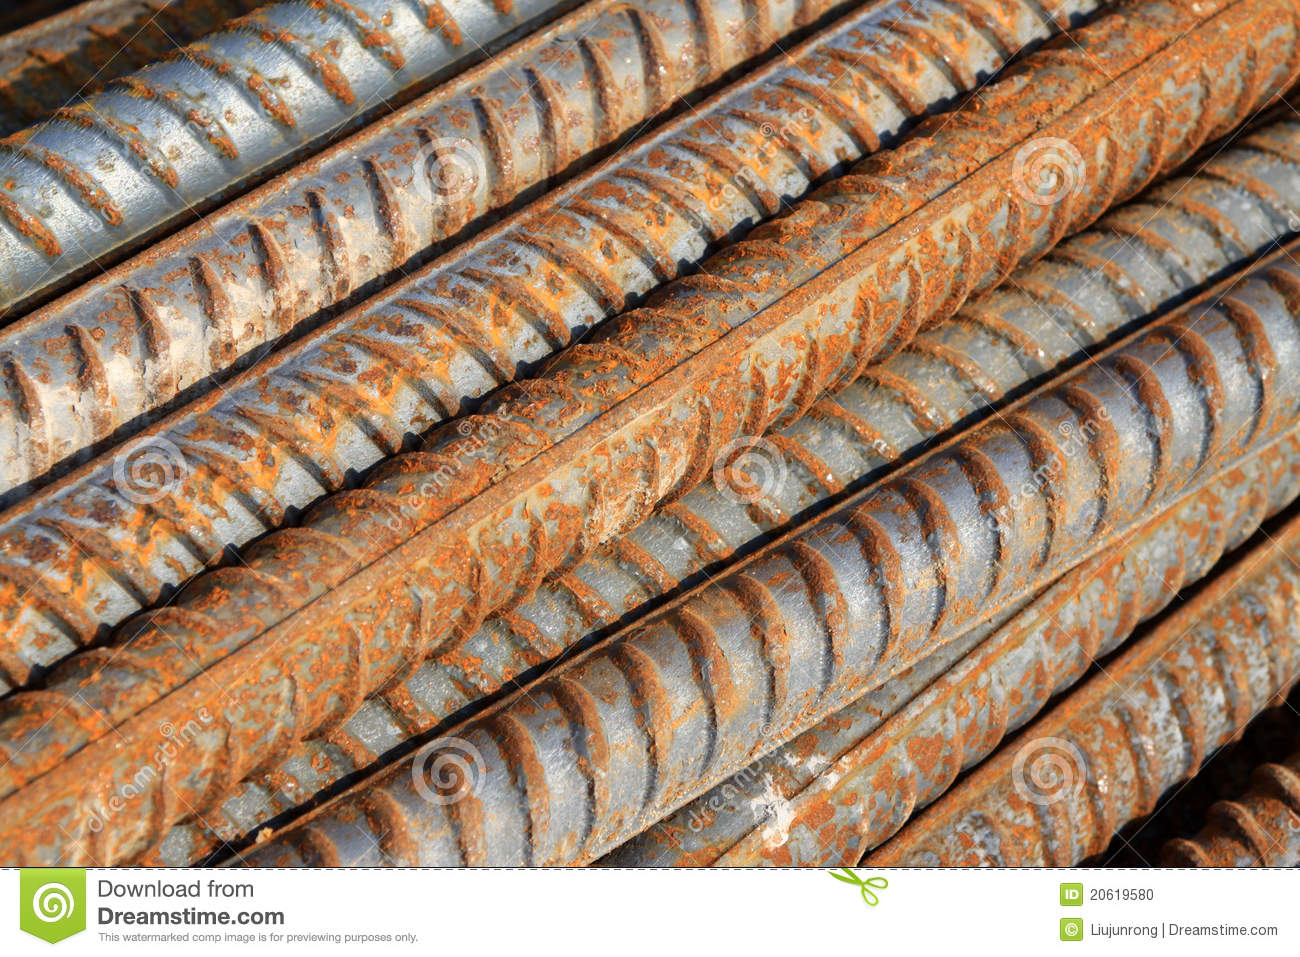 Twisted Steel Construction Materials Stock Photo   Image  20619580